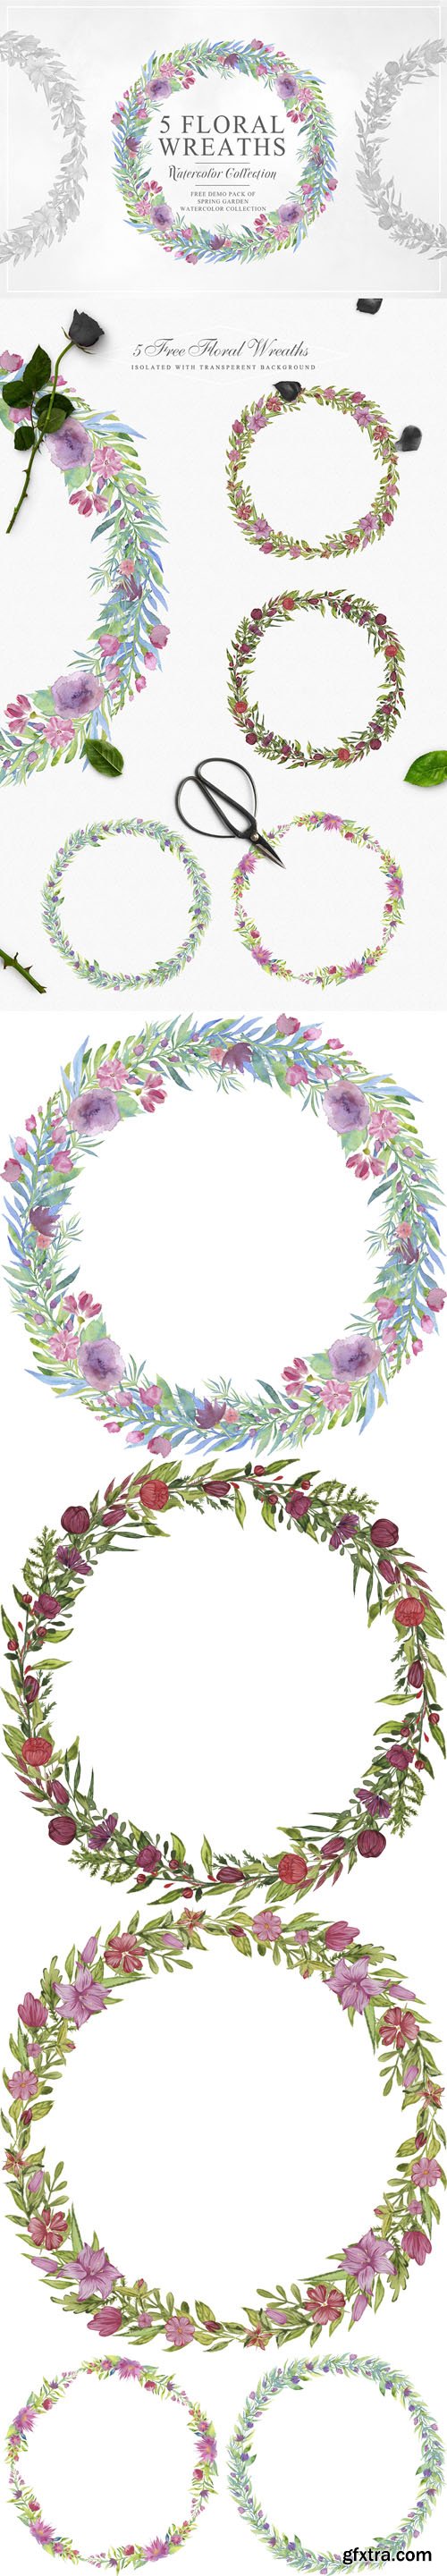 5 Floral Wreaths - Pack Of Spring Garden Watercolor Collection